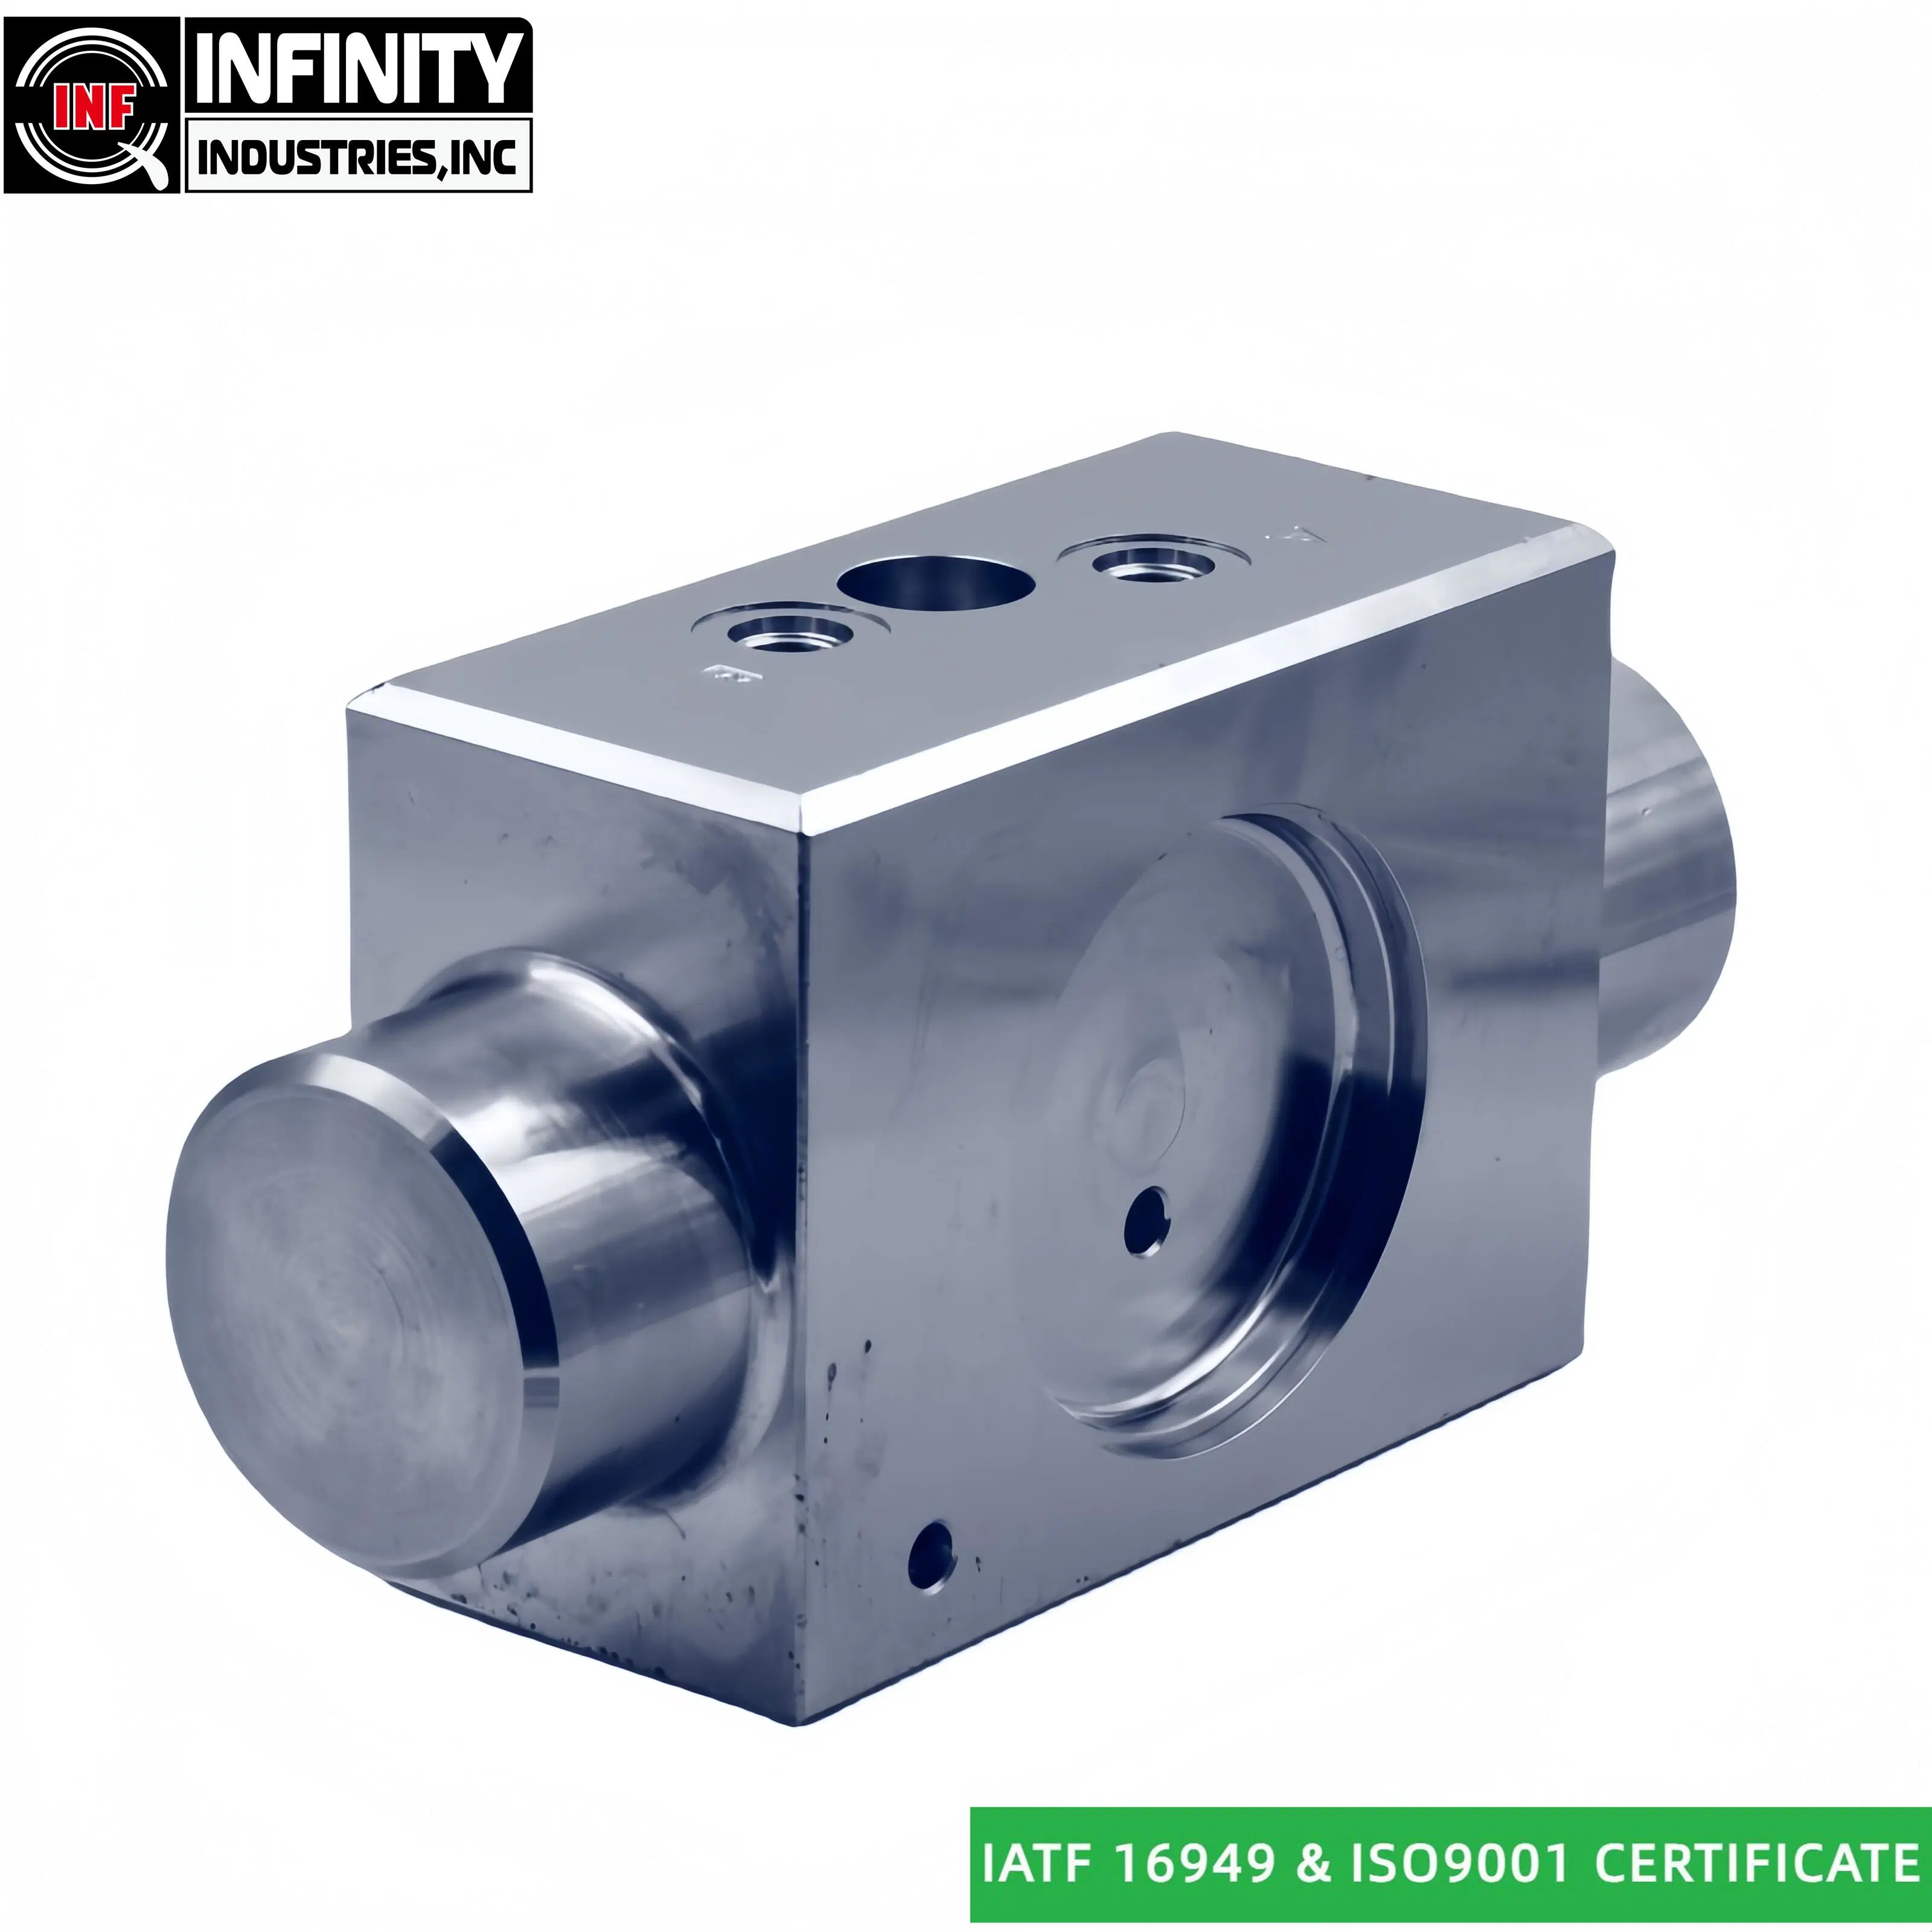 CNC Milling Part for Hydraulic Cylinders Such as Cylinder End and Valves